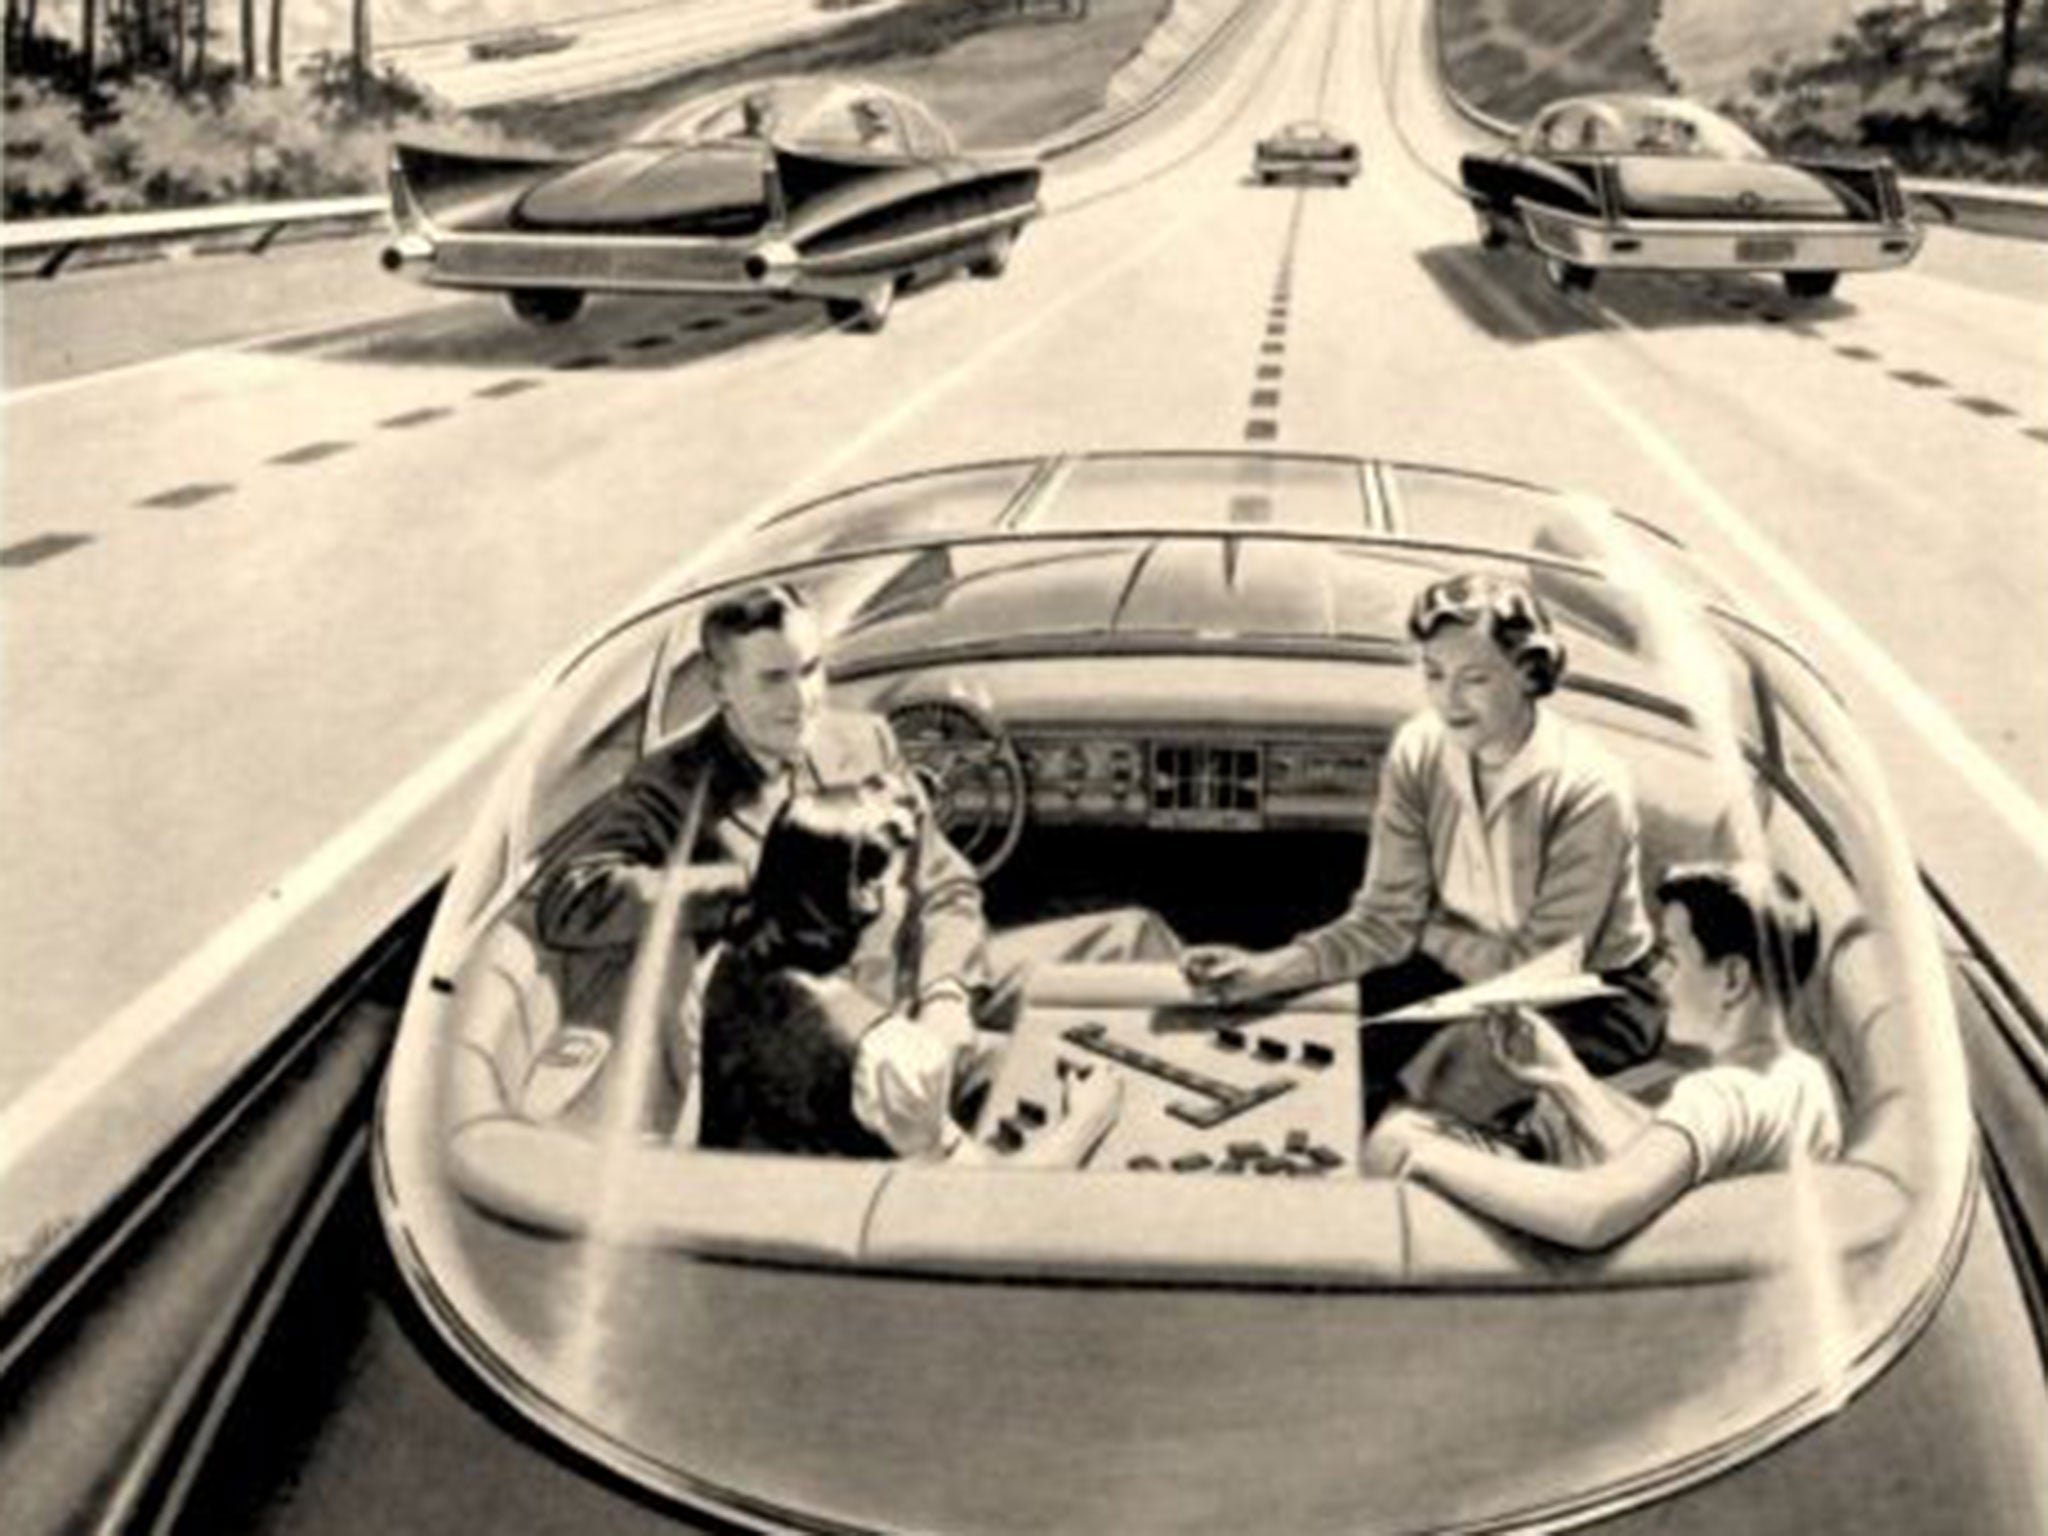 Brave new world: A 1957 vision of the family of the future playing games as the car drIves itself